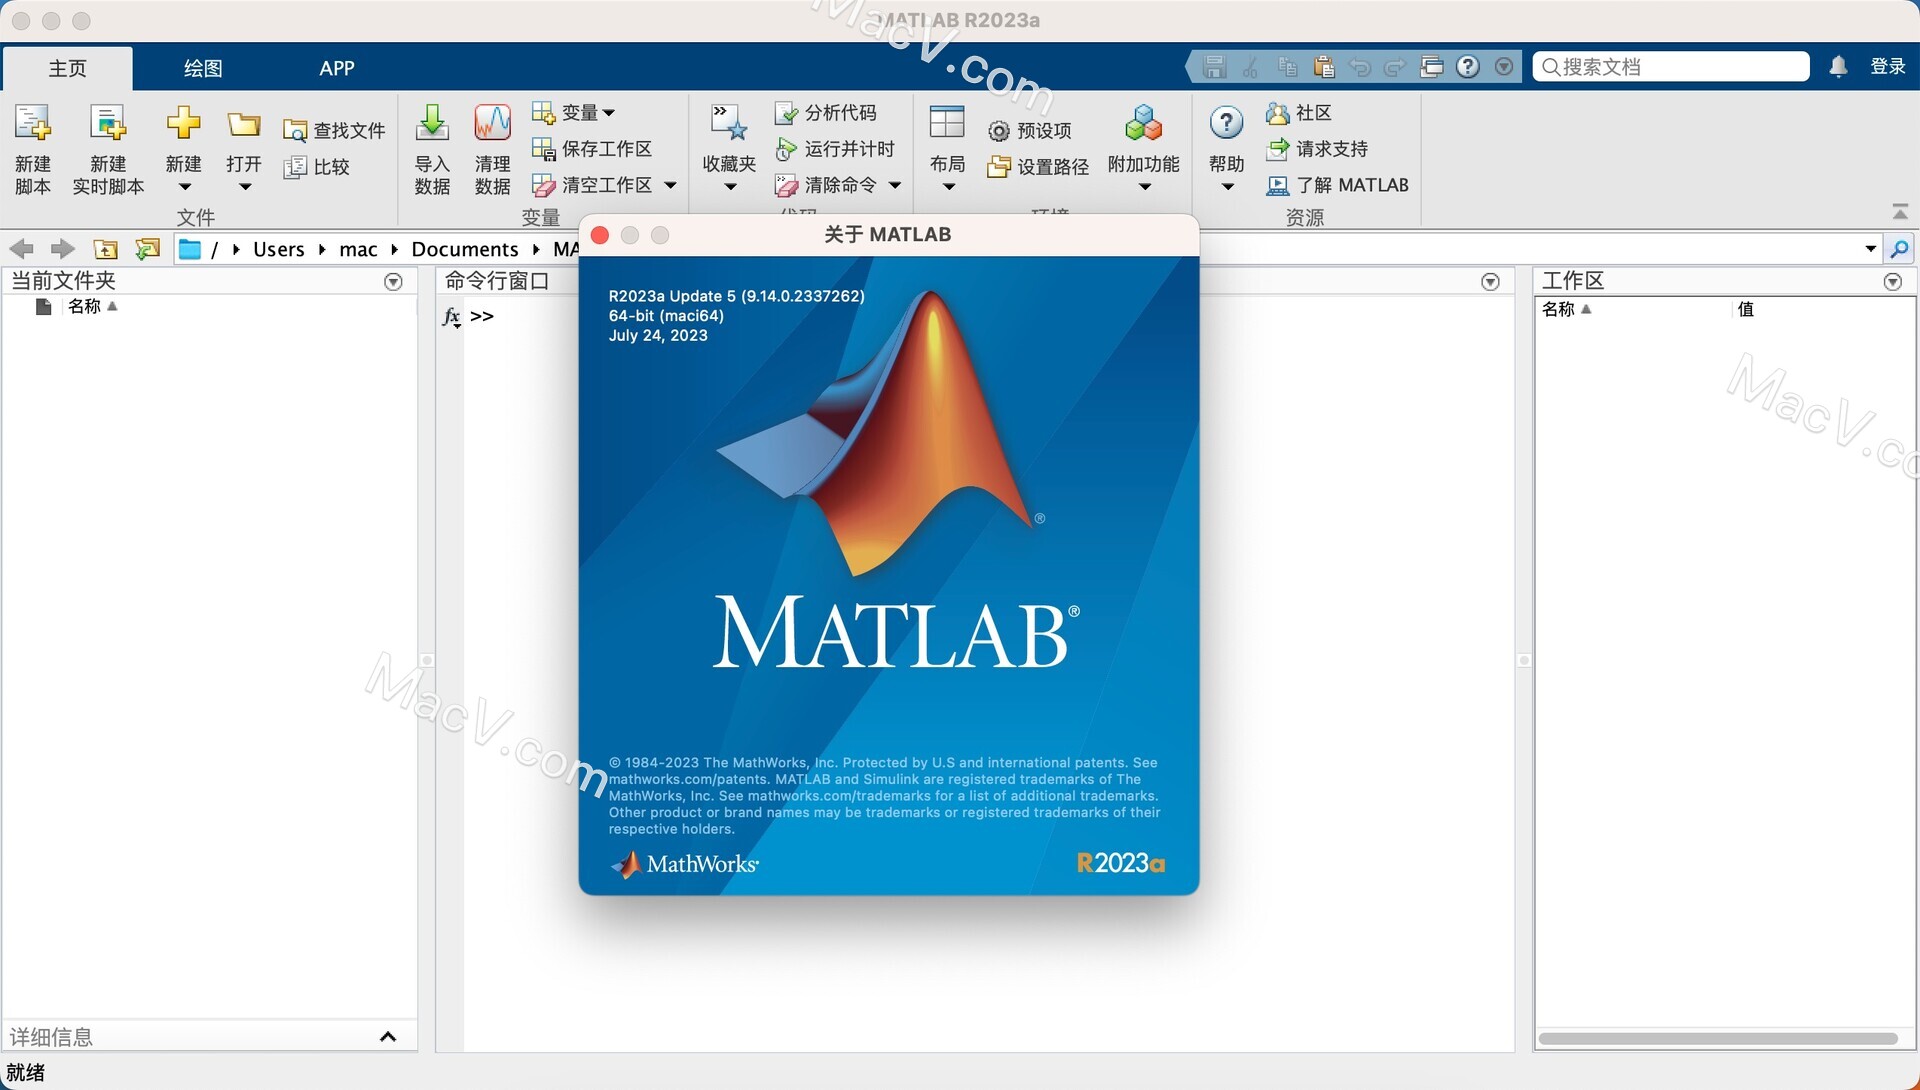 download the new MathWorks MATLAB R2023a 9.14.0.2337262